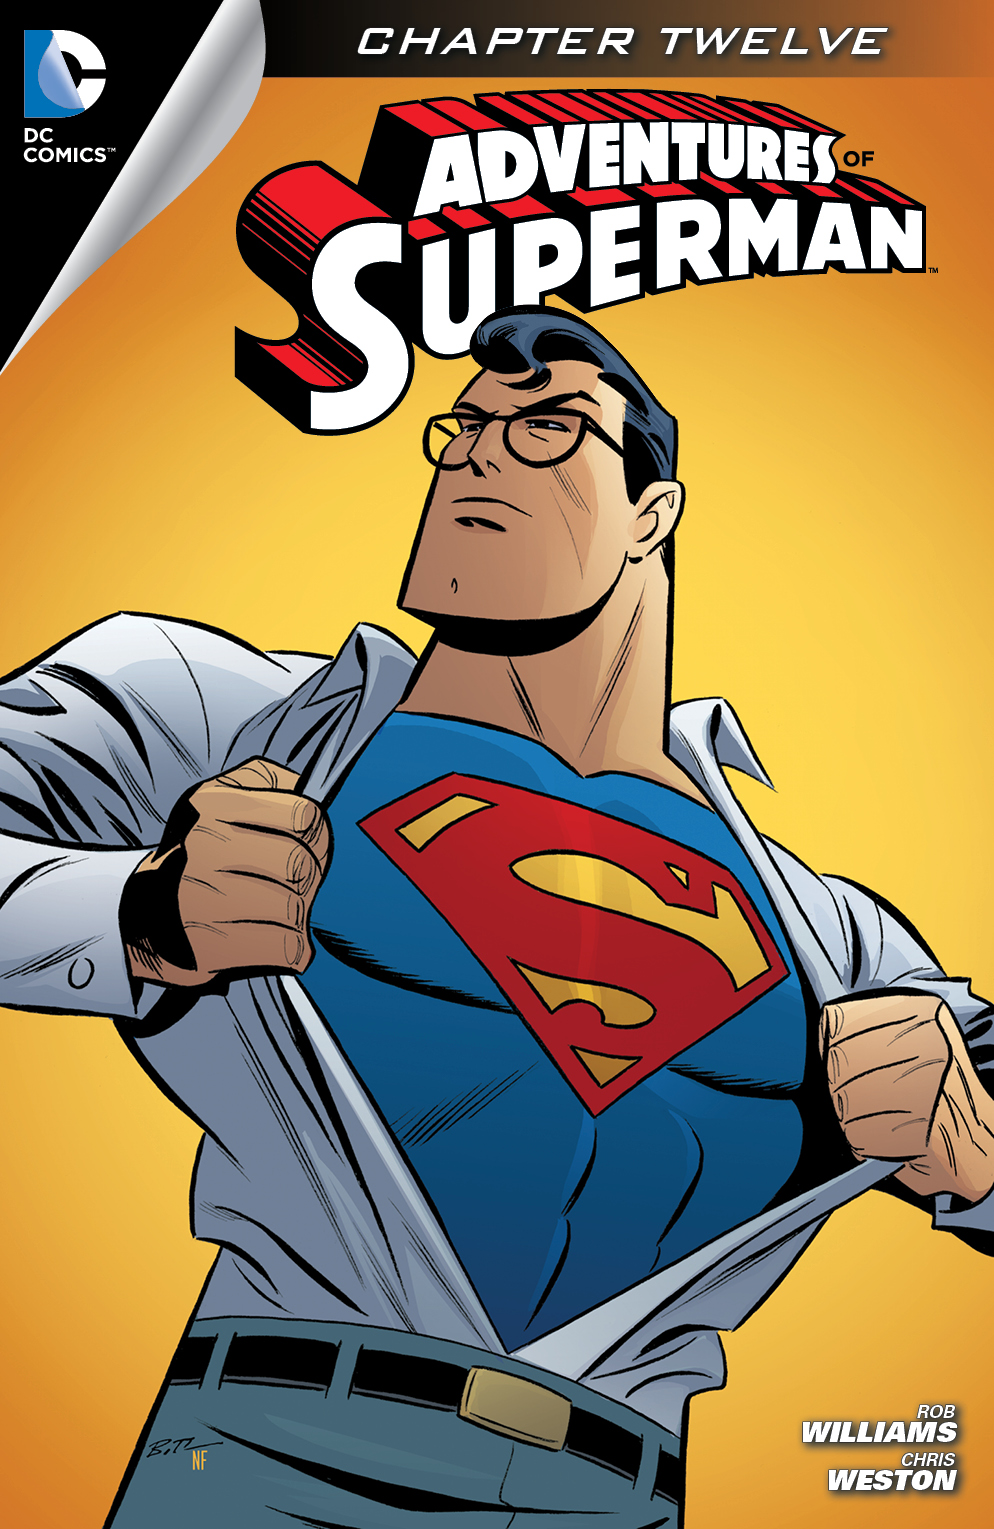 Adventures of Superman (2013-) #12 preview images